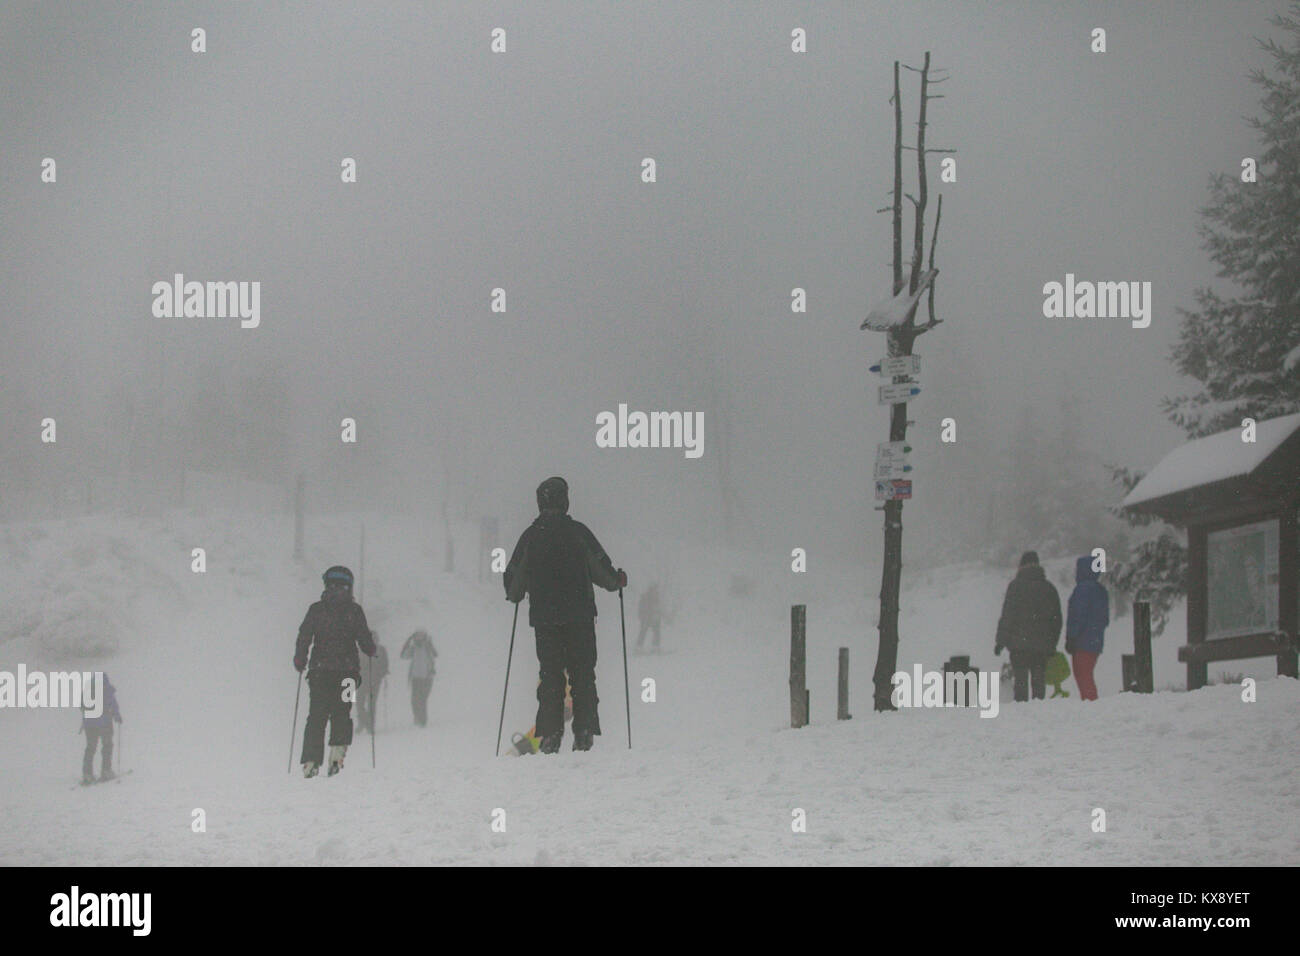 Skiers snowboarders and hikers arriving at covered in snow and mist summit of Skrzyczne mountain in Szczyrk heading for the slopes and hiking trails Stock Photo